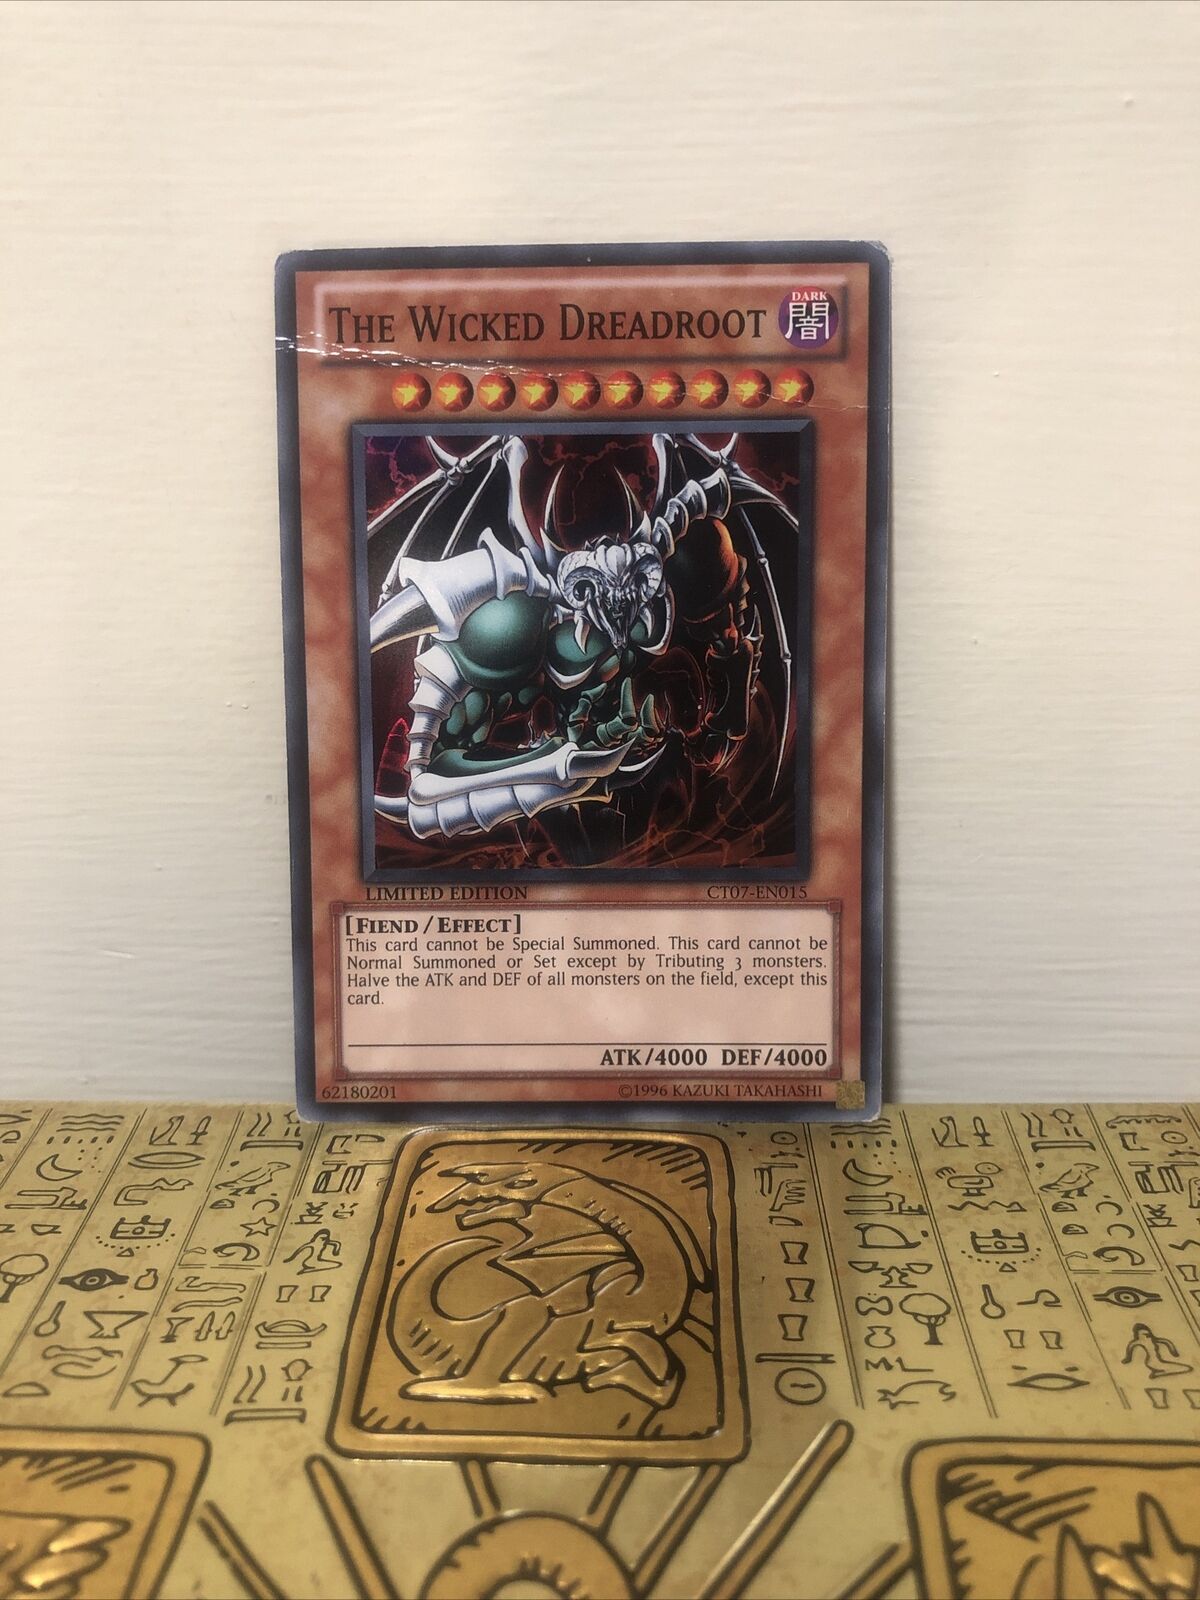 Yugioh - The Wicked Dreadroot - CT07-EN015 - Super Rare Limited Edition - (HP)